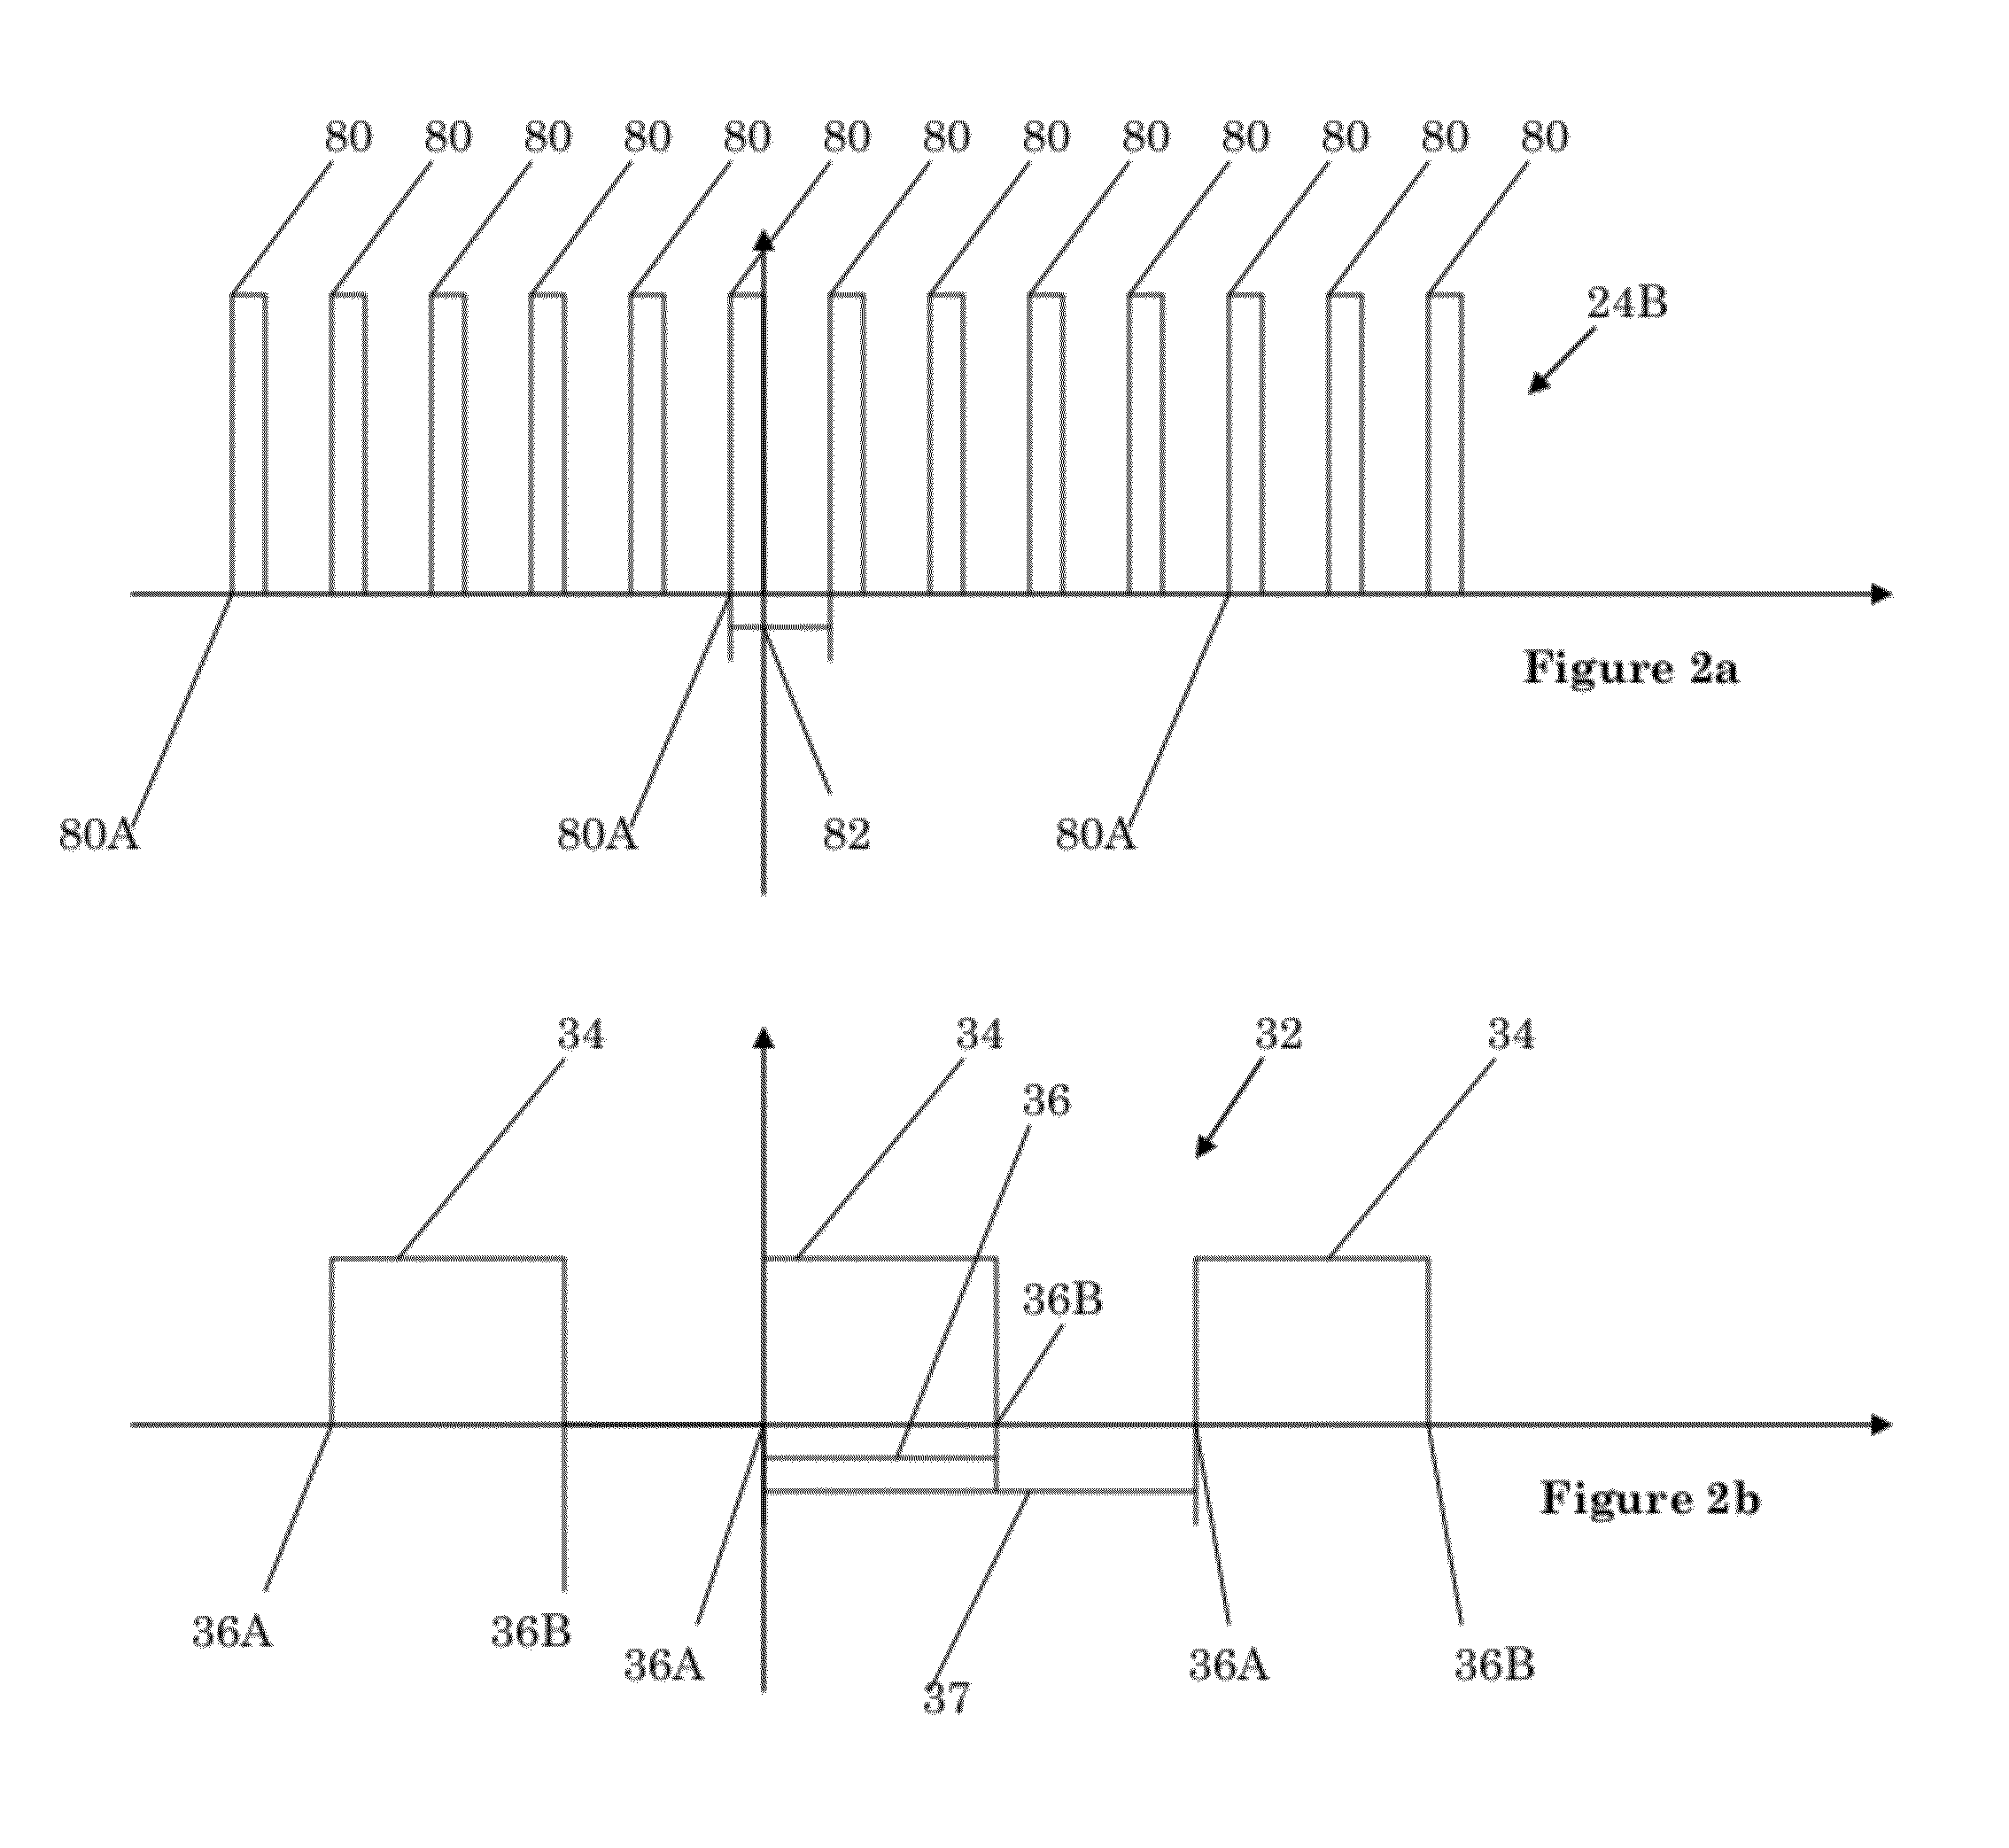 Ballast circuit for a gas-discharge lamp having a filament drive circuit with monostable control